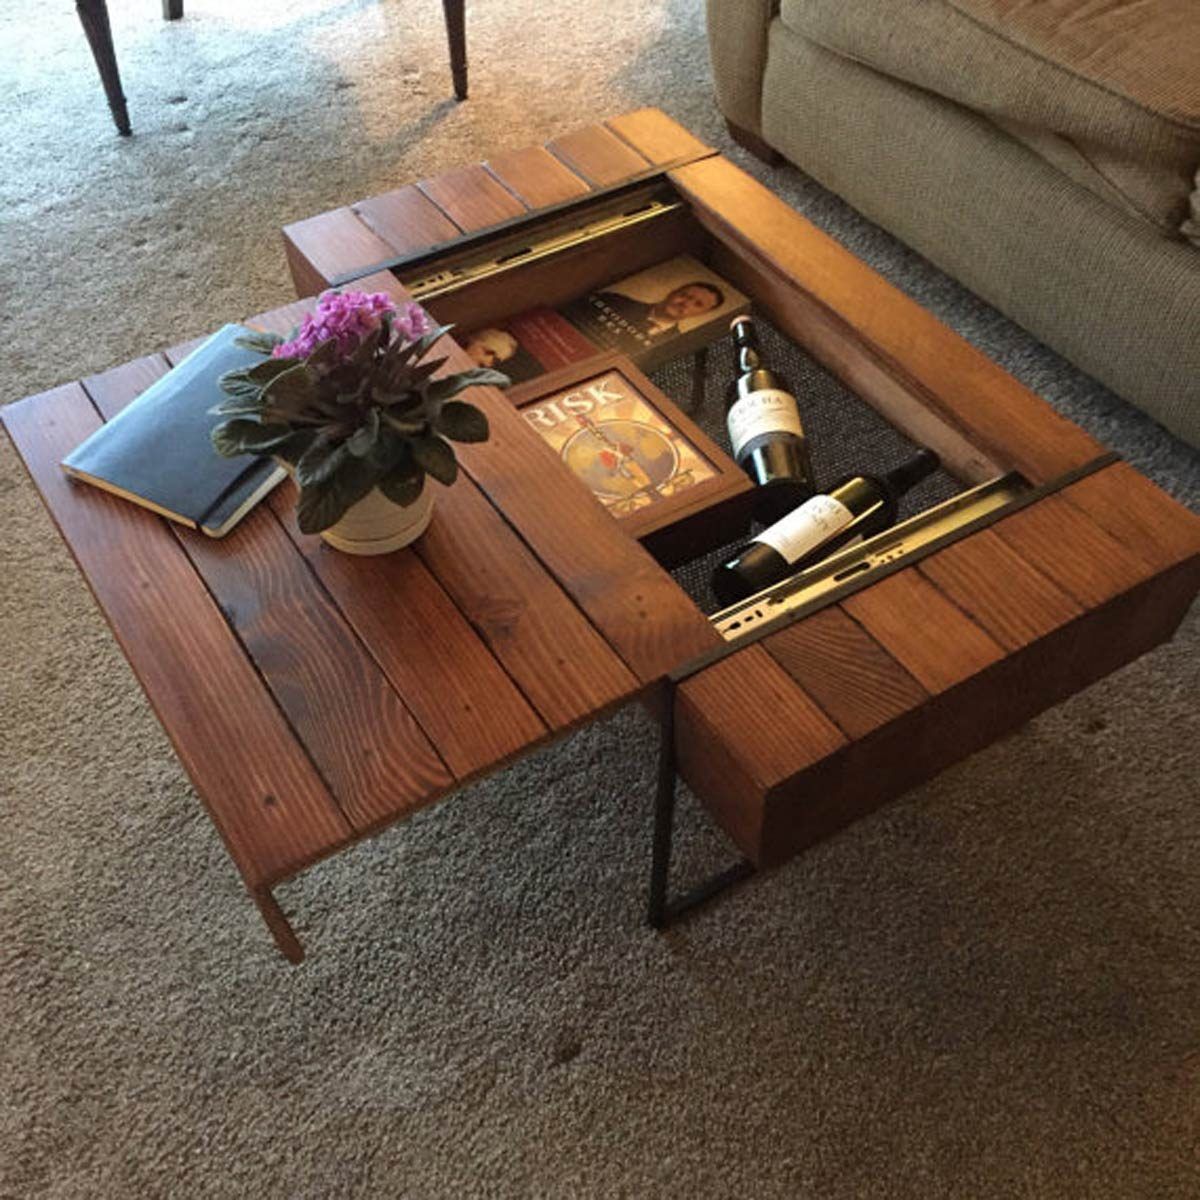 12 Pieces Of Furniture With Hidden Compartments | Family Handyman Pertaining To Coffee Tables With Hidden Compartments (View 5 of 15)